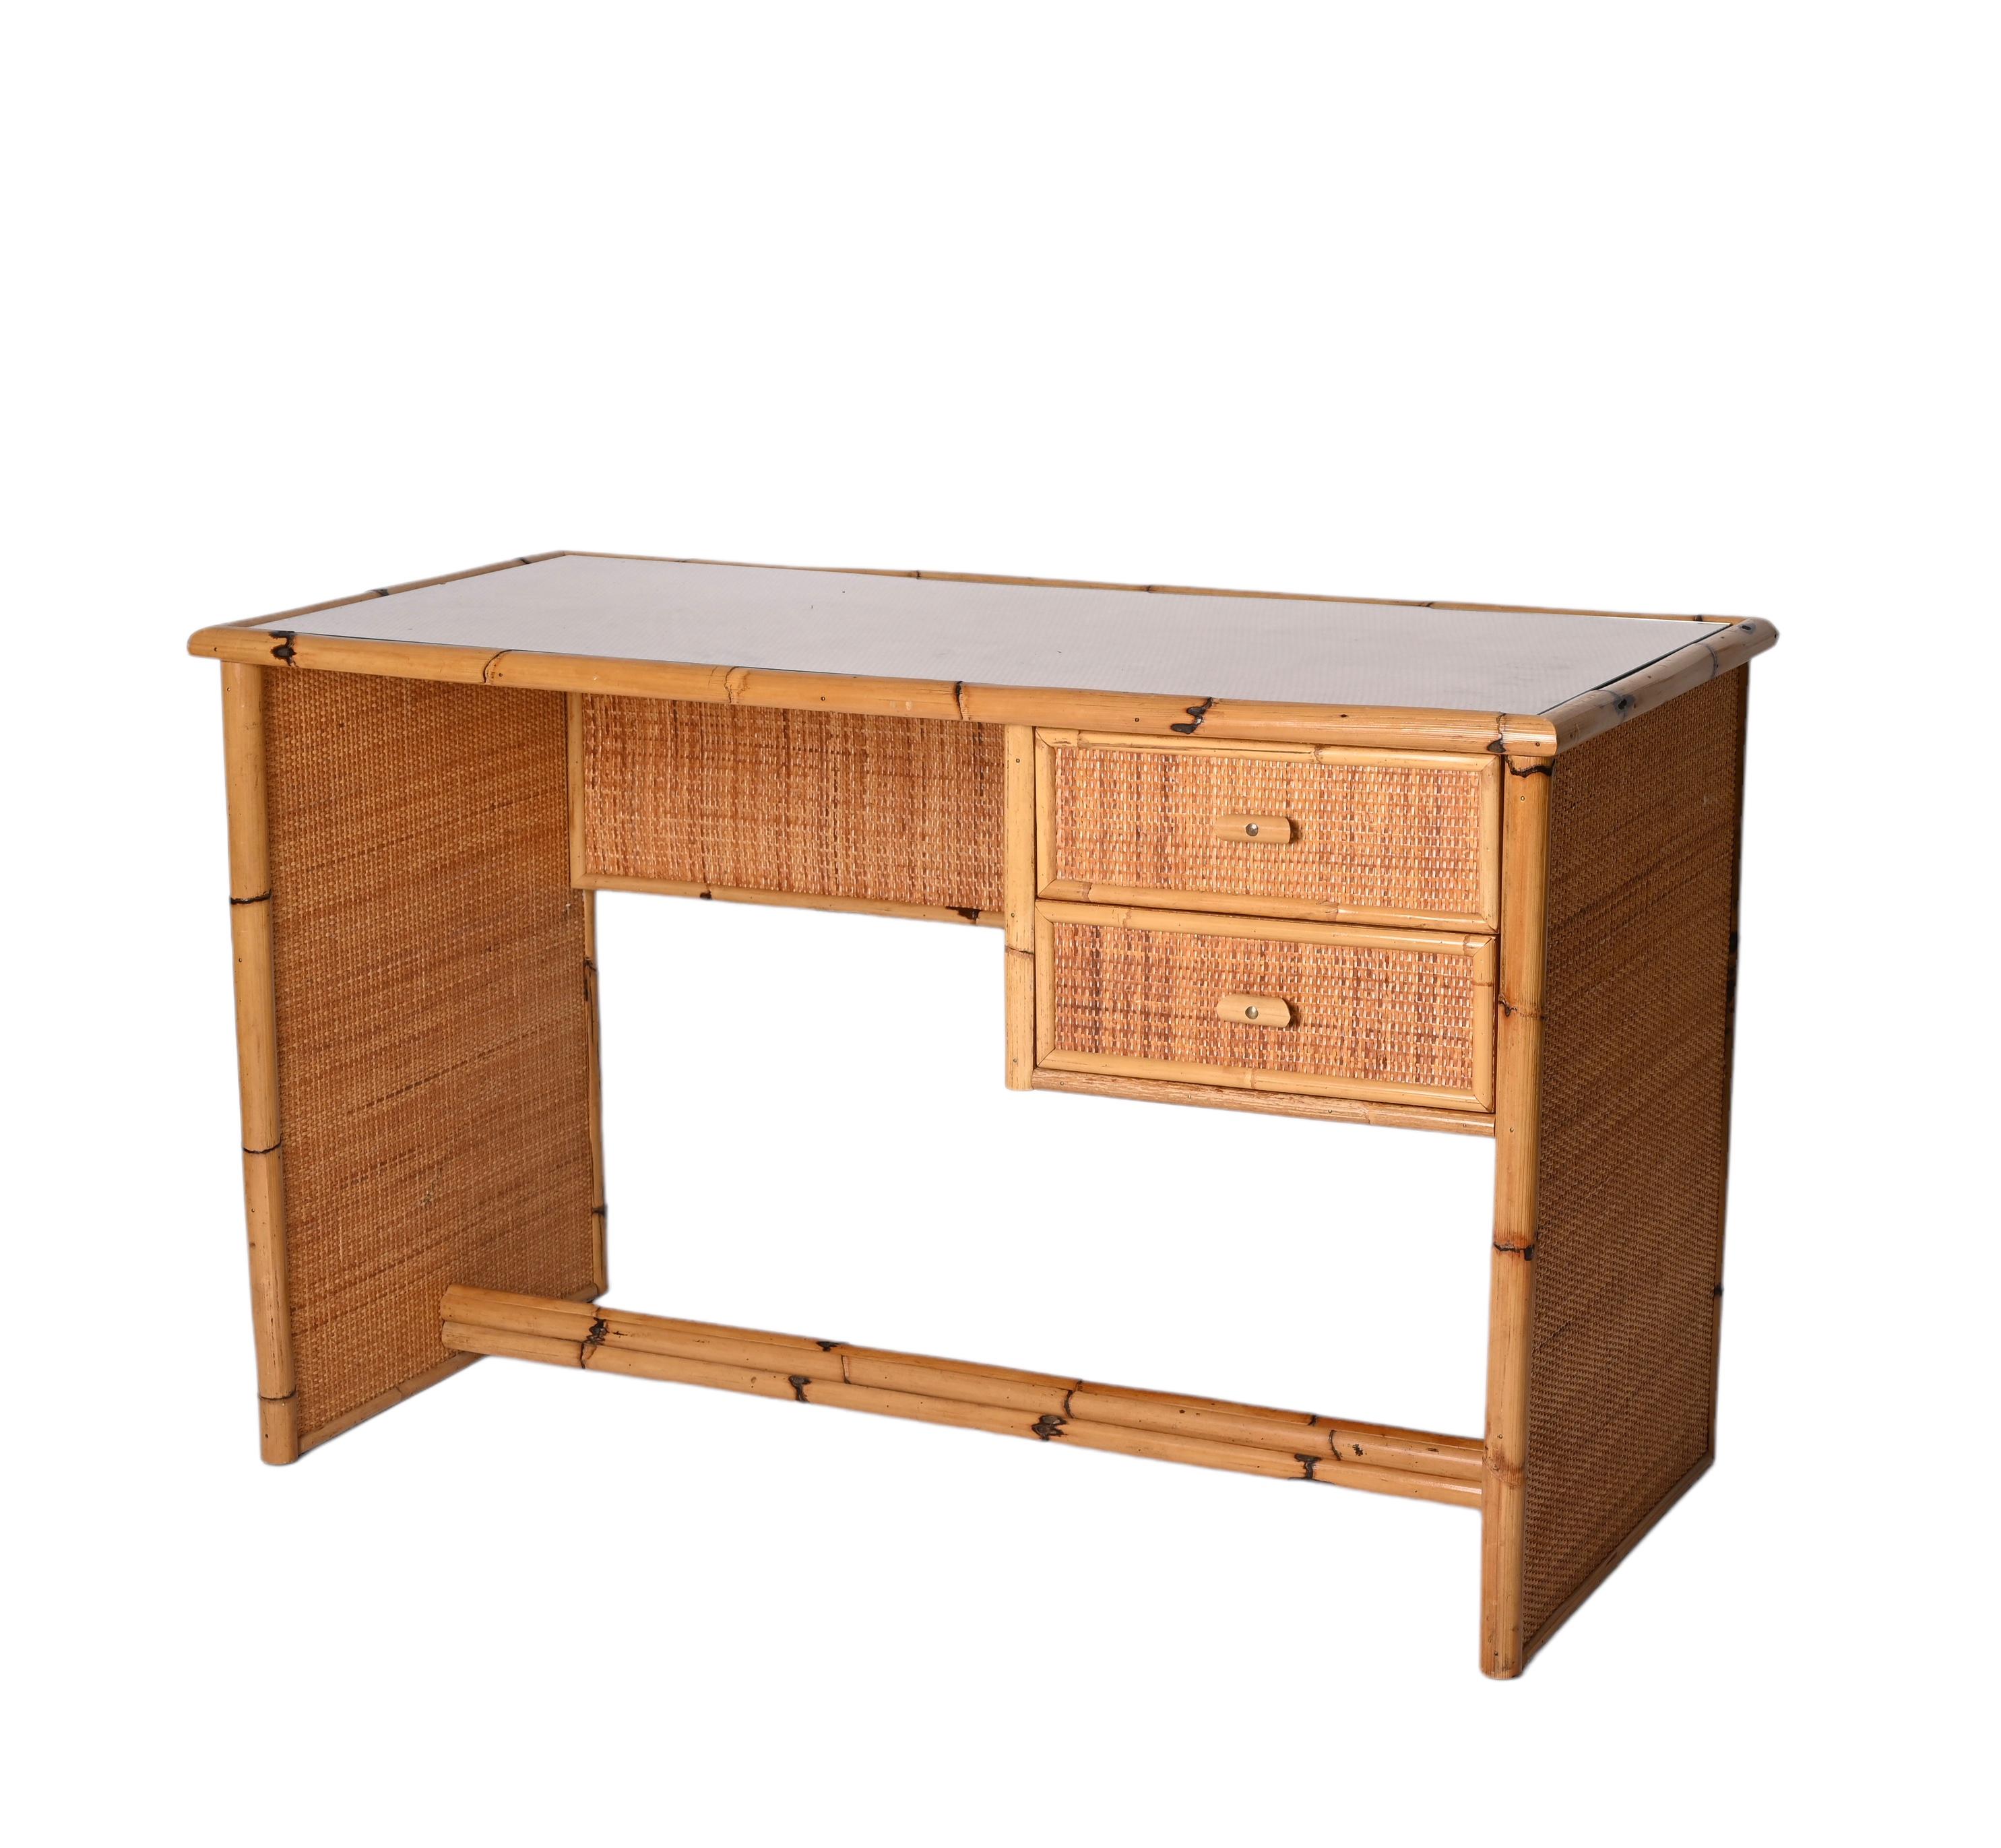 Midcentury Glass Top, Bamboo and Wicker Italian Desk with Drawers, 1980s For Sale 5